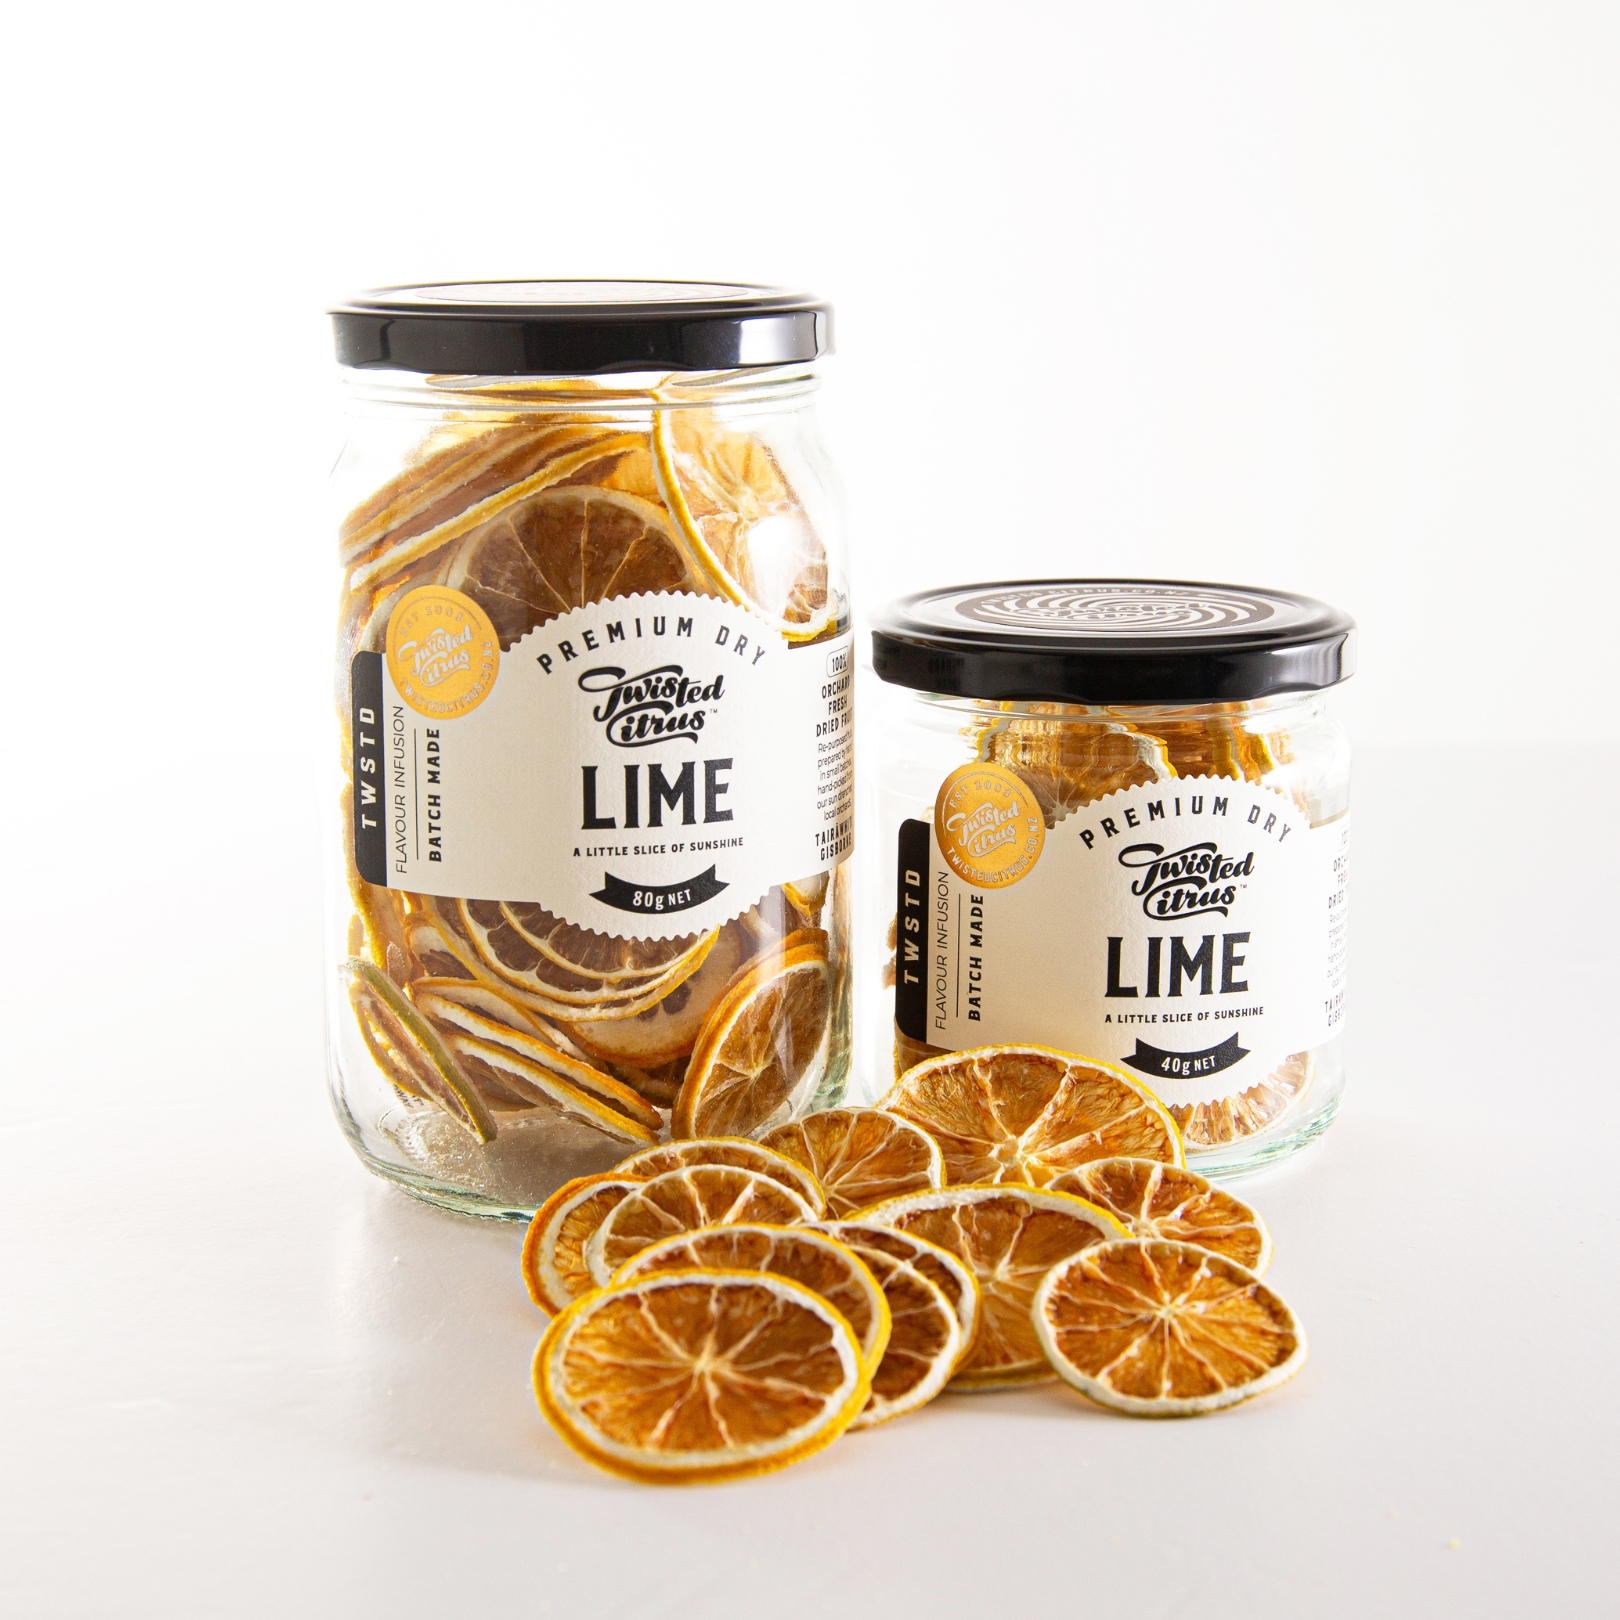 Buy Twisted Dried Fruit - Lime Online NZ - Twisted Citrus